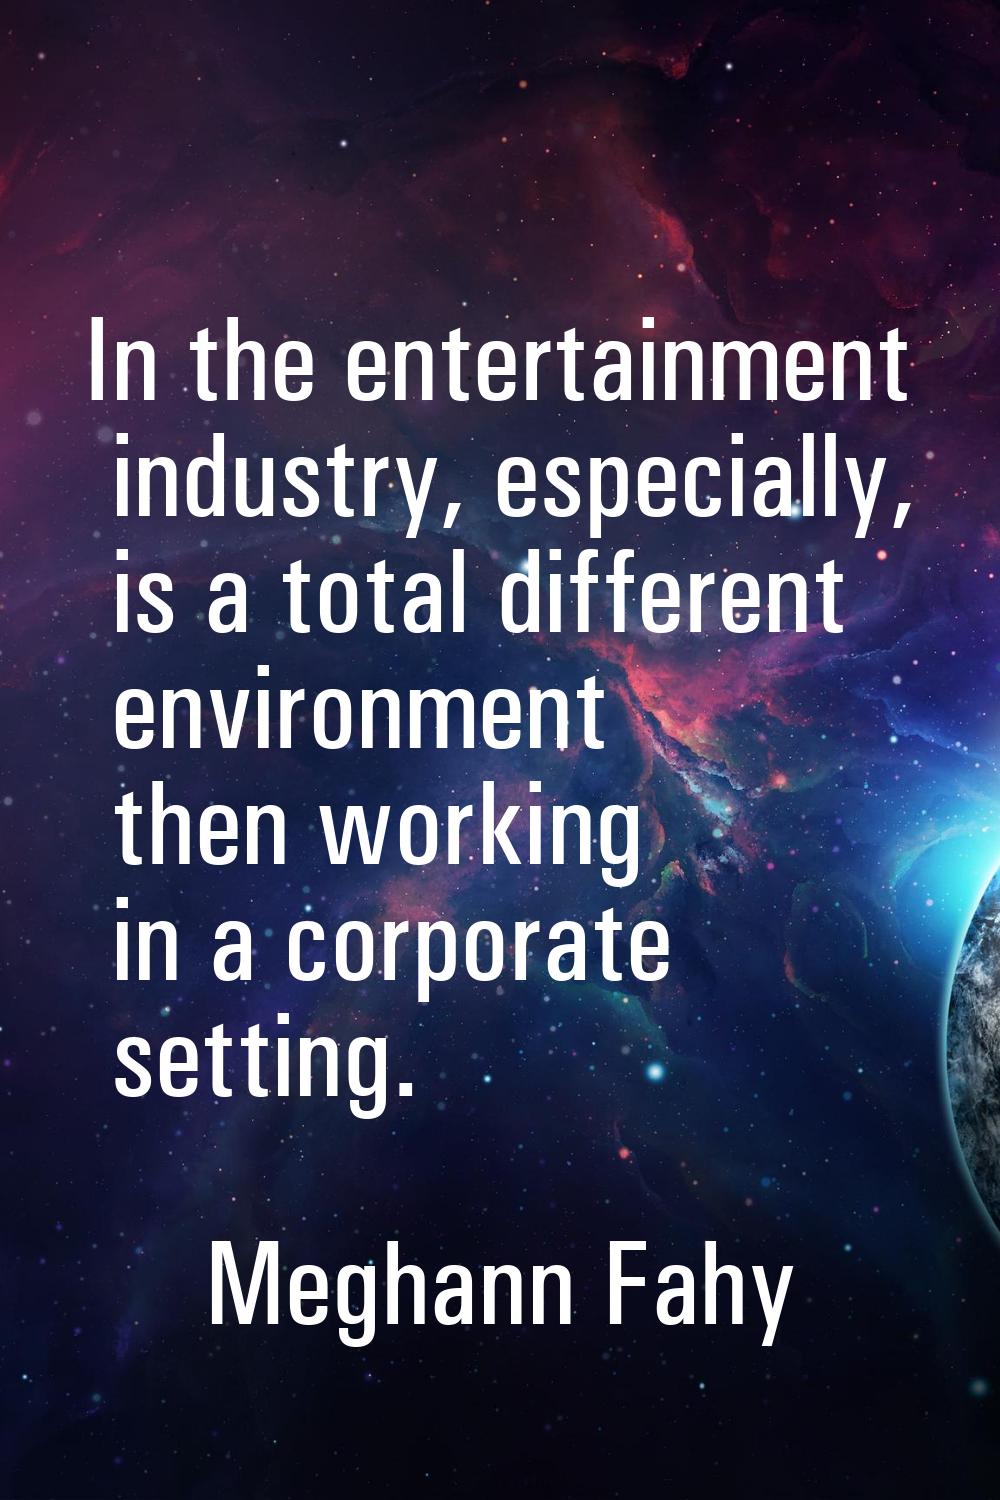 In the entertainment industry, especially, is a total different environment then working in a corpo